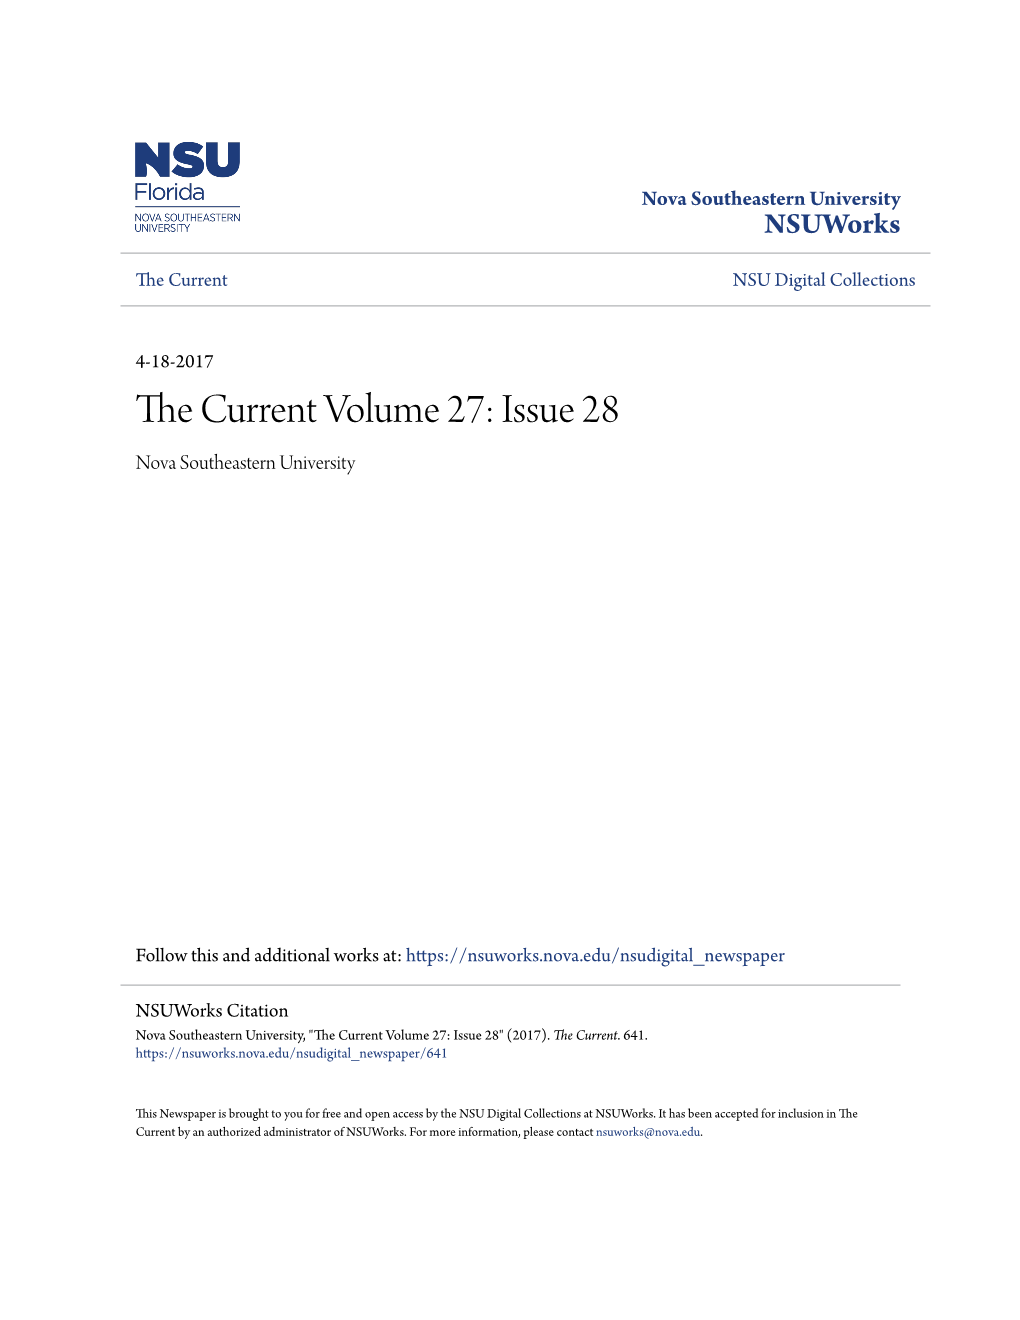 The Current Volume 27: Issue 28